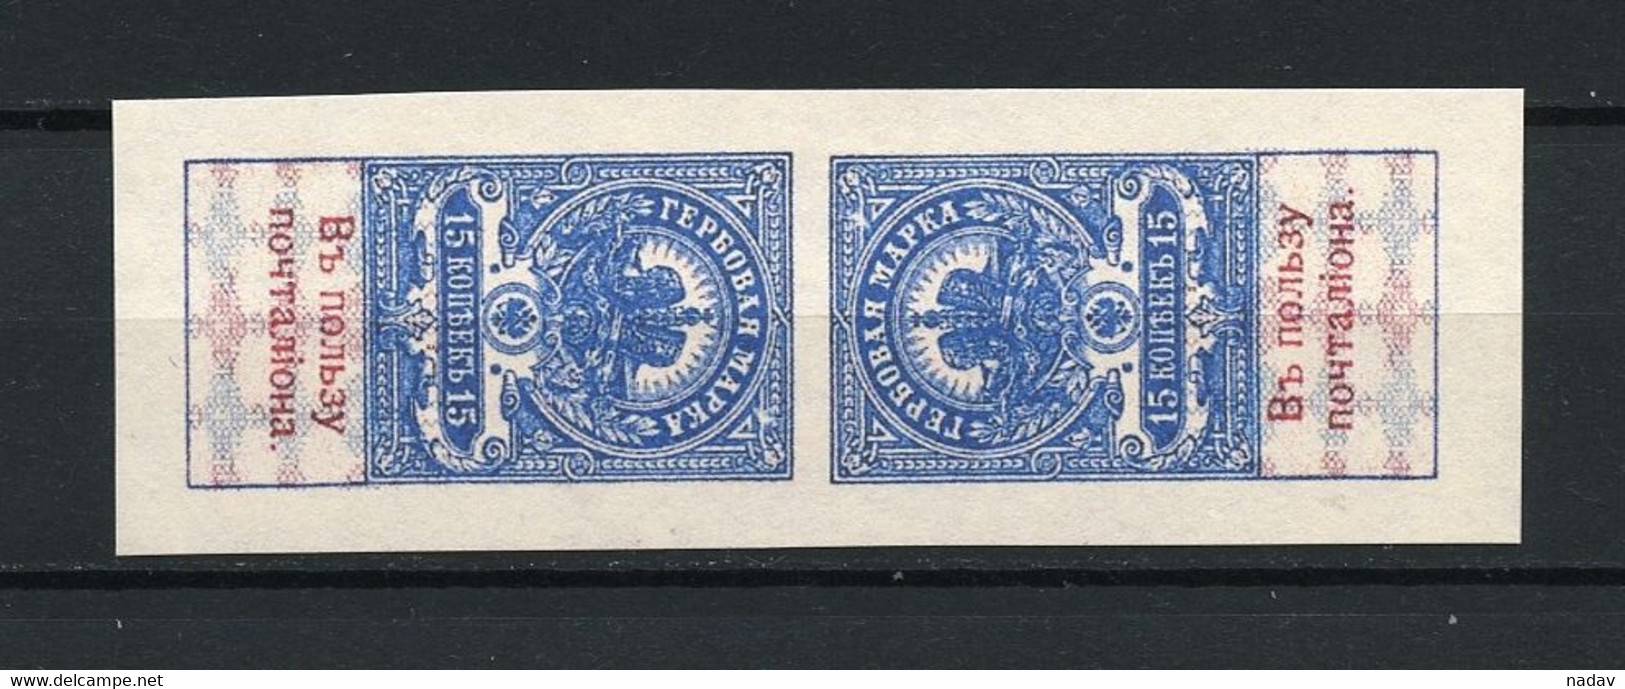 Russia -1909- Imperforate, Tete-beche, Reproduction - MNH** - Proofs & Reprints